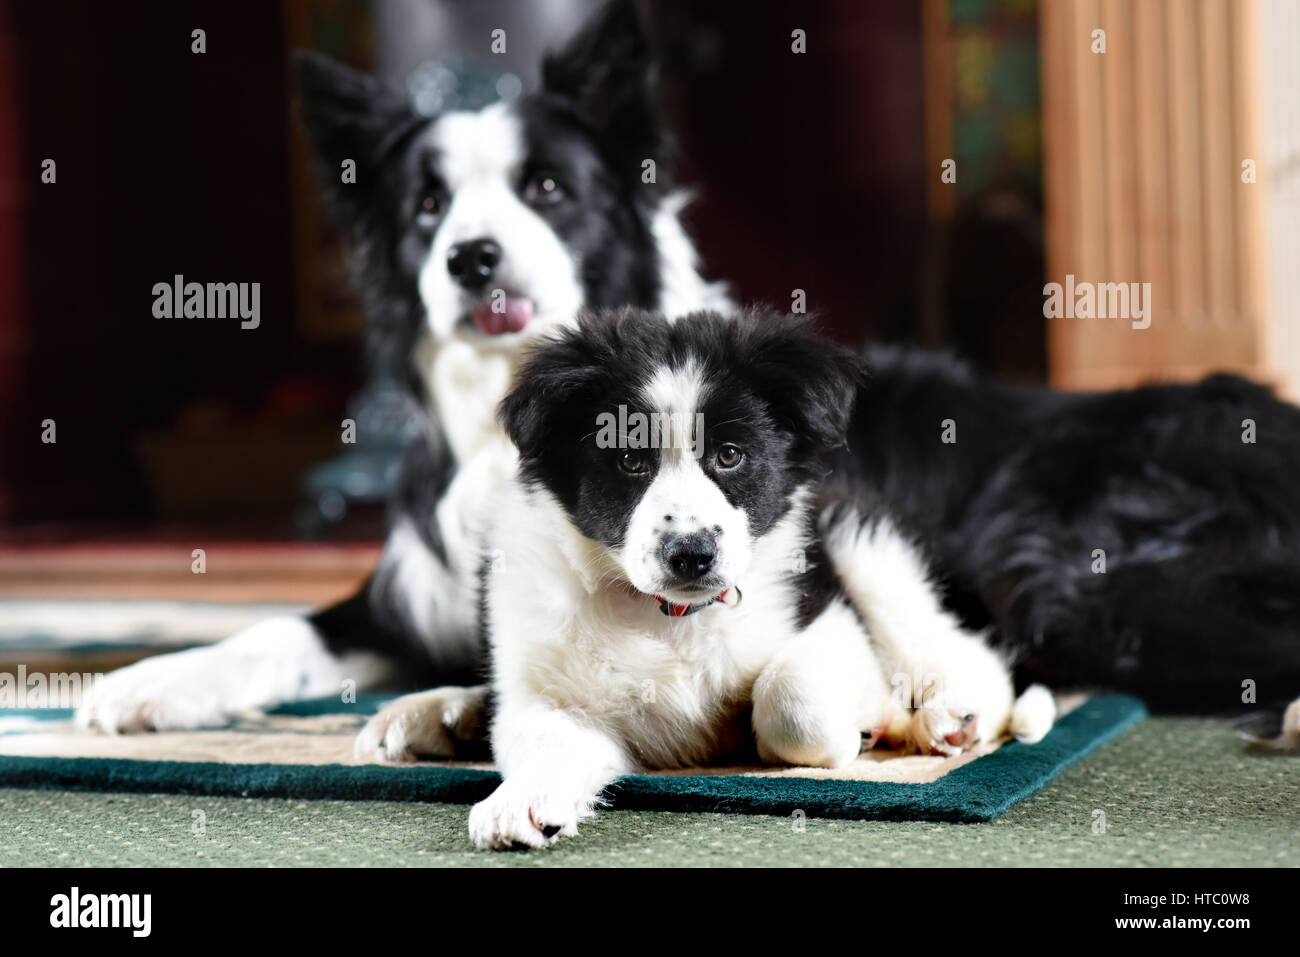 Cute border collie puppy dog dogs Stock Photo